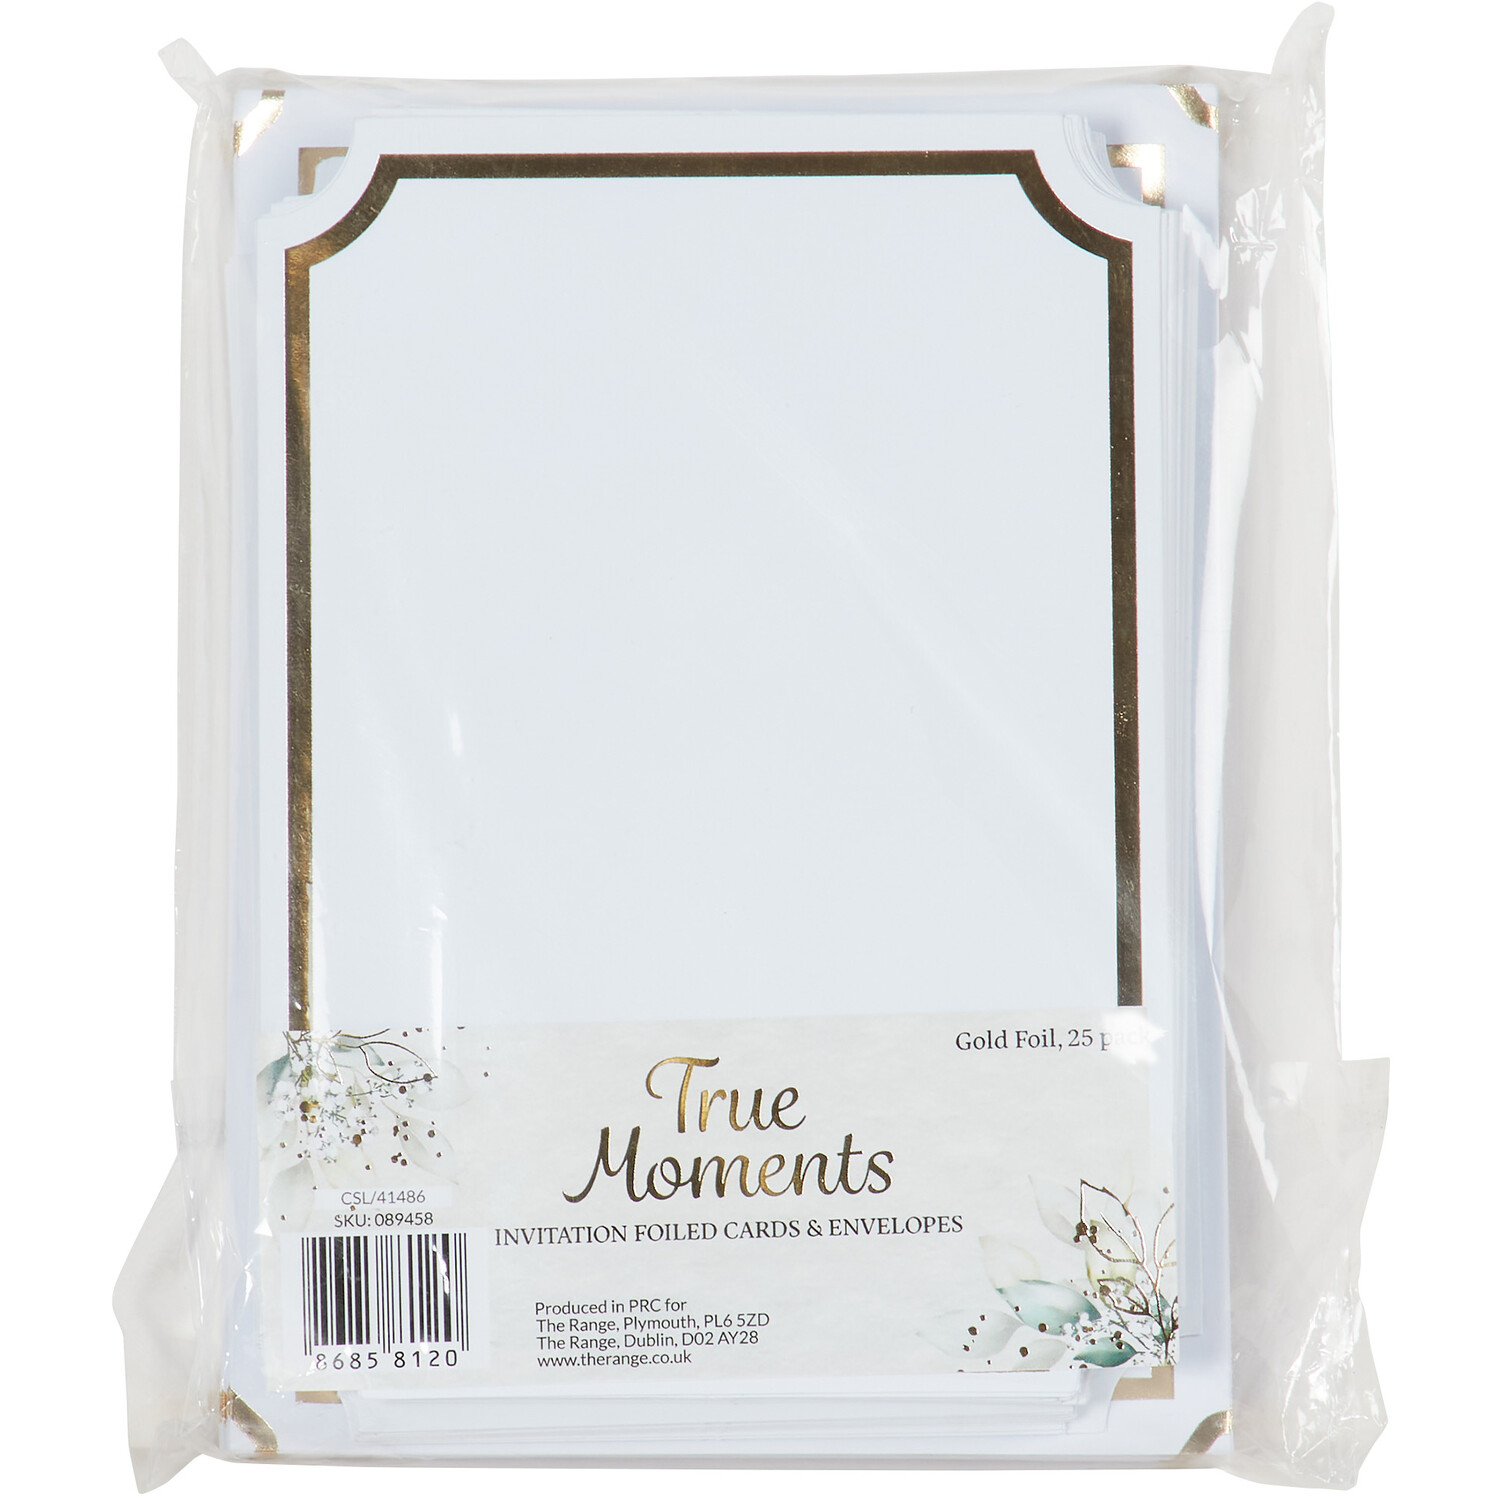 True Moments Foiled Invitation Cards and Envelopes Image 1